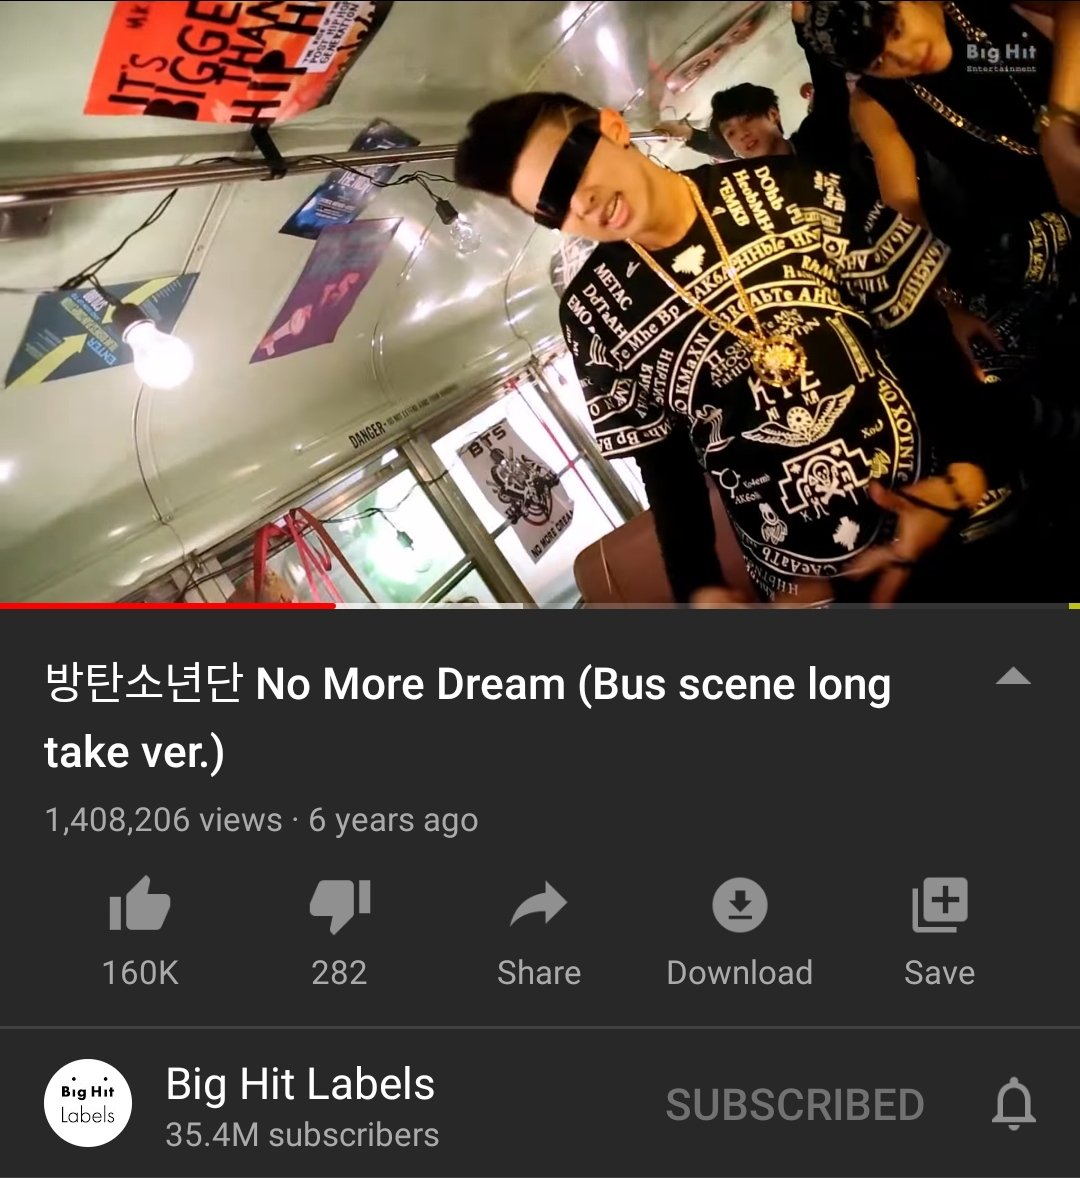 No more dream has two other MVS did you know? Bus scene long version and dance version!